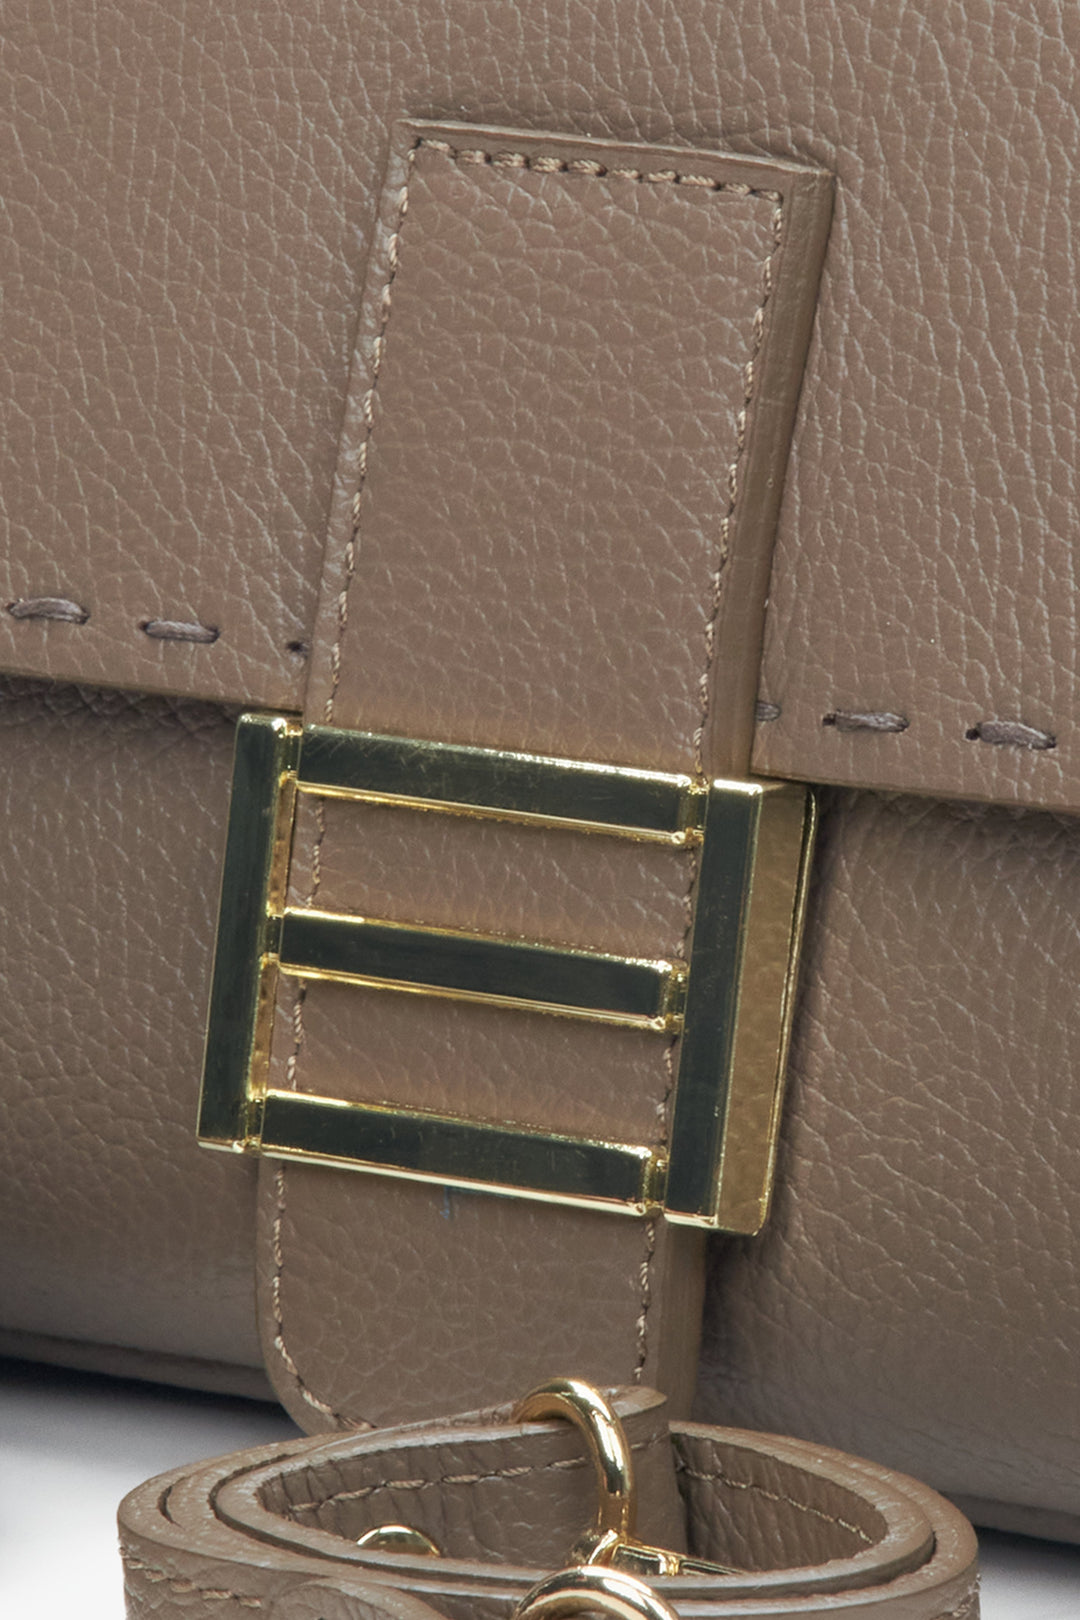 Women's handbag made of Italian genuine grey leather with golden hardware - close-up on detail.